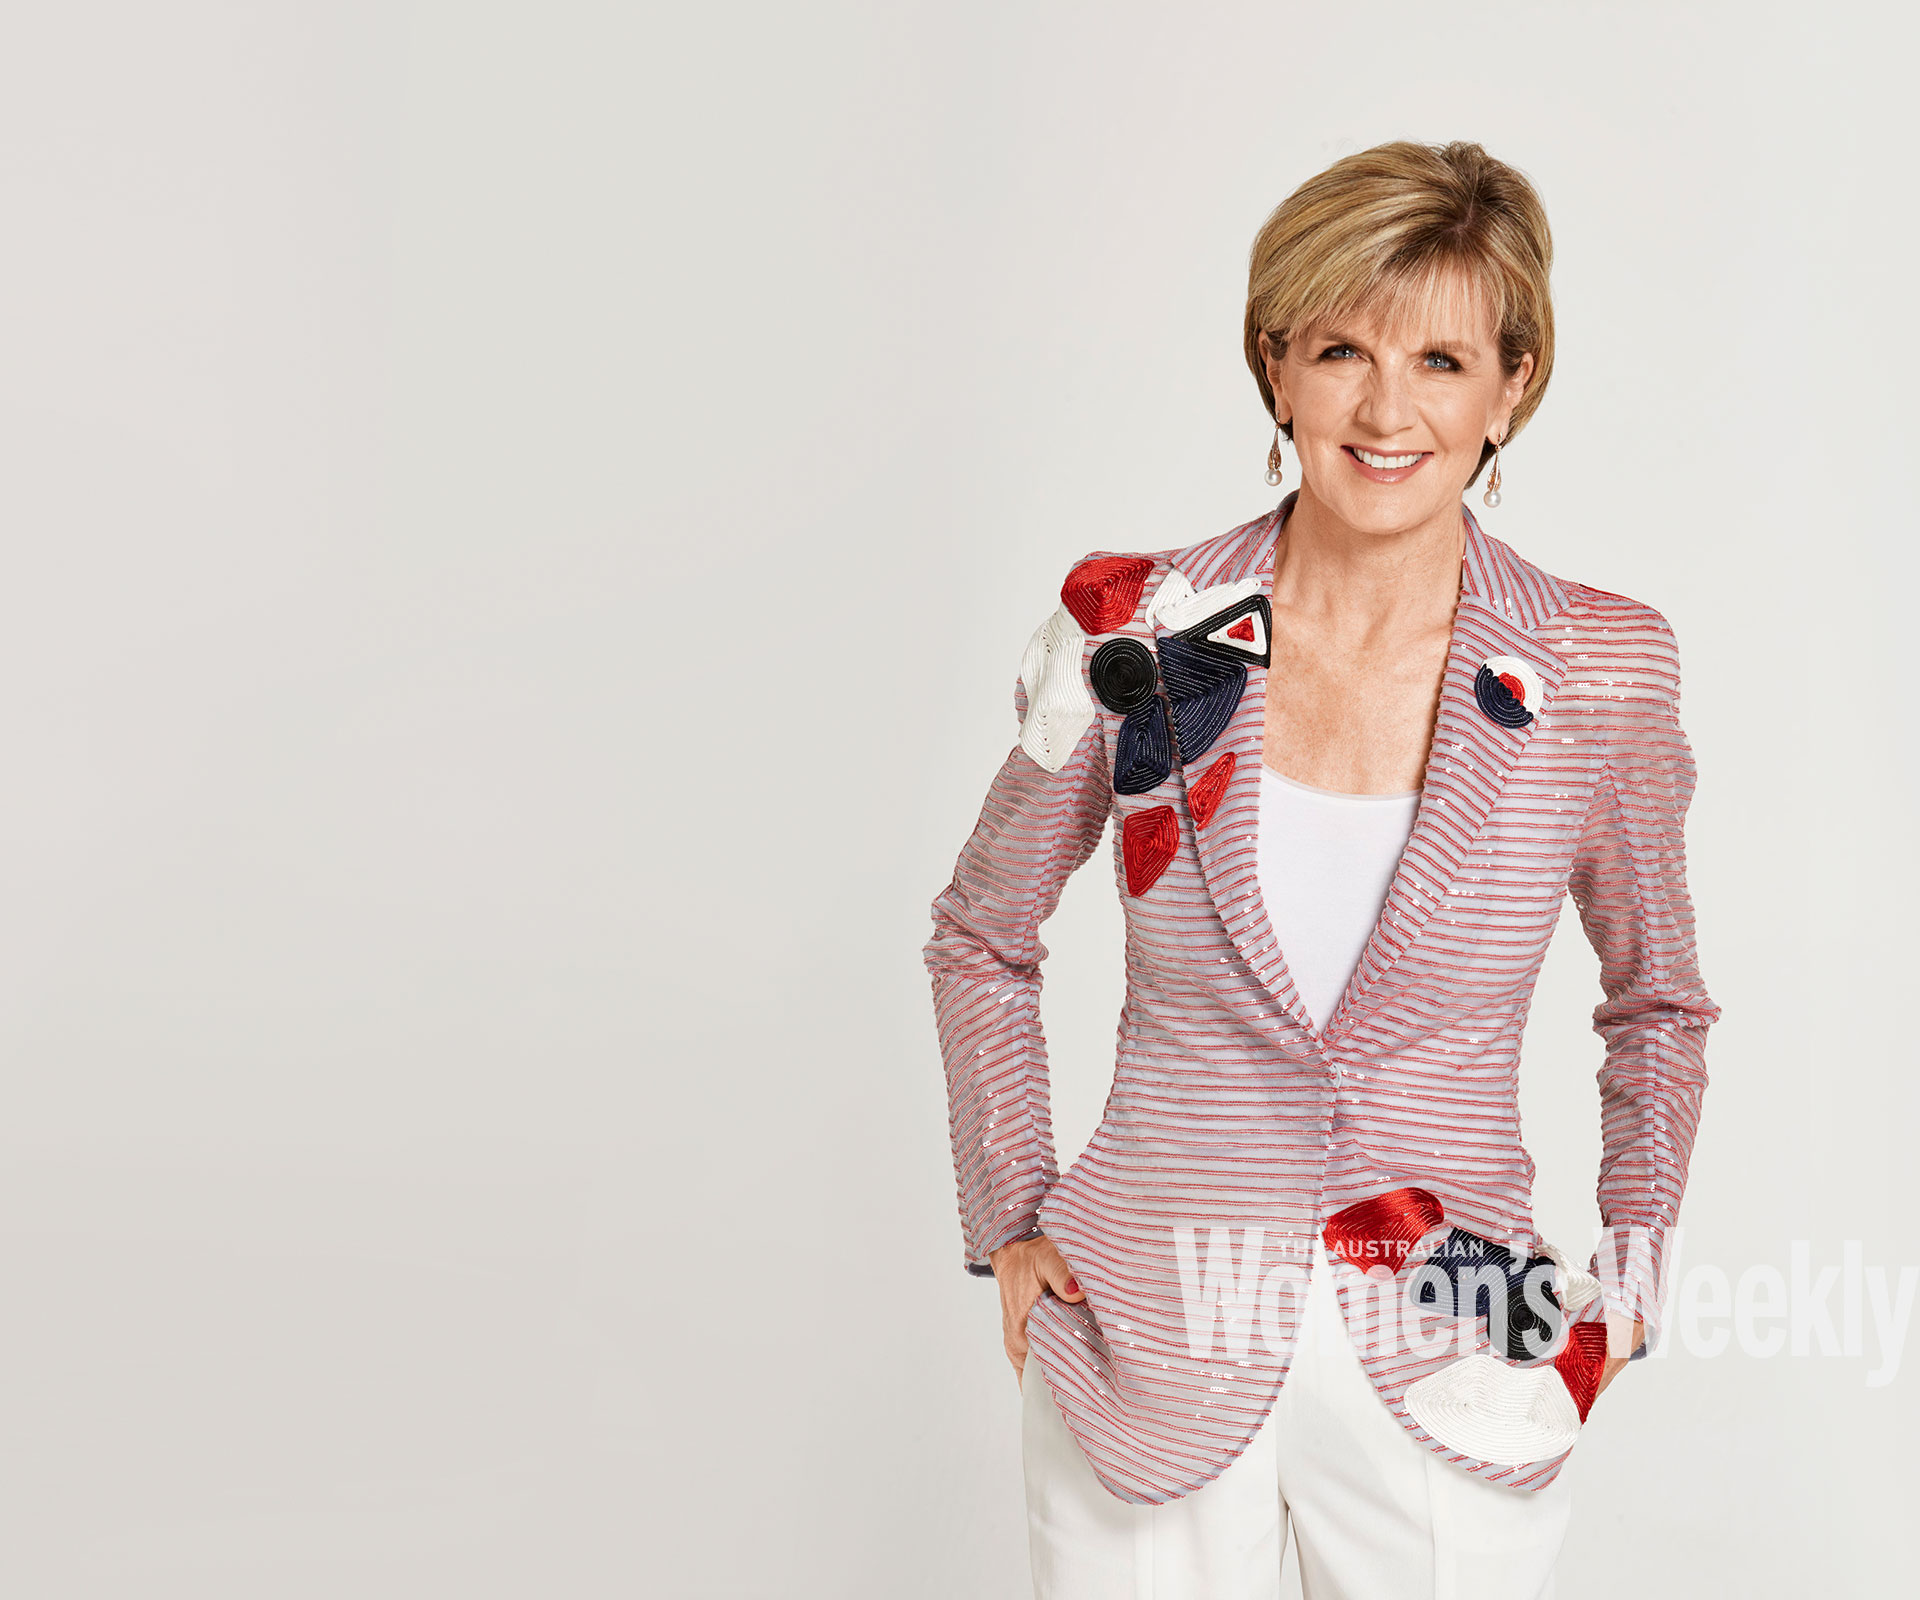 The Weekly’s 25 most powerful women in Australia announced